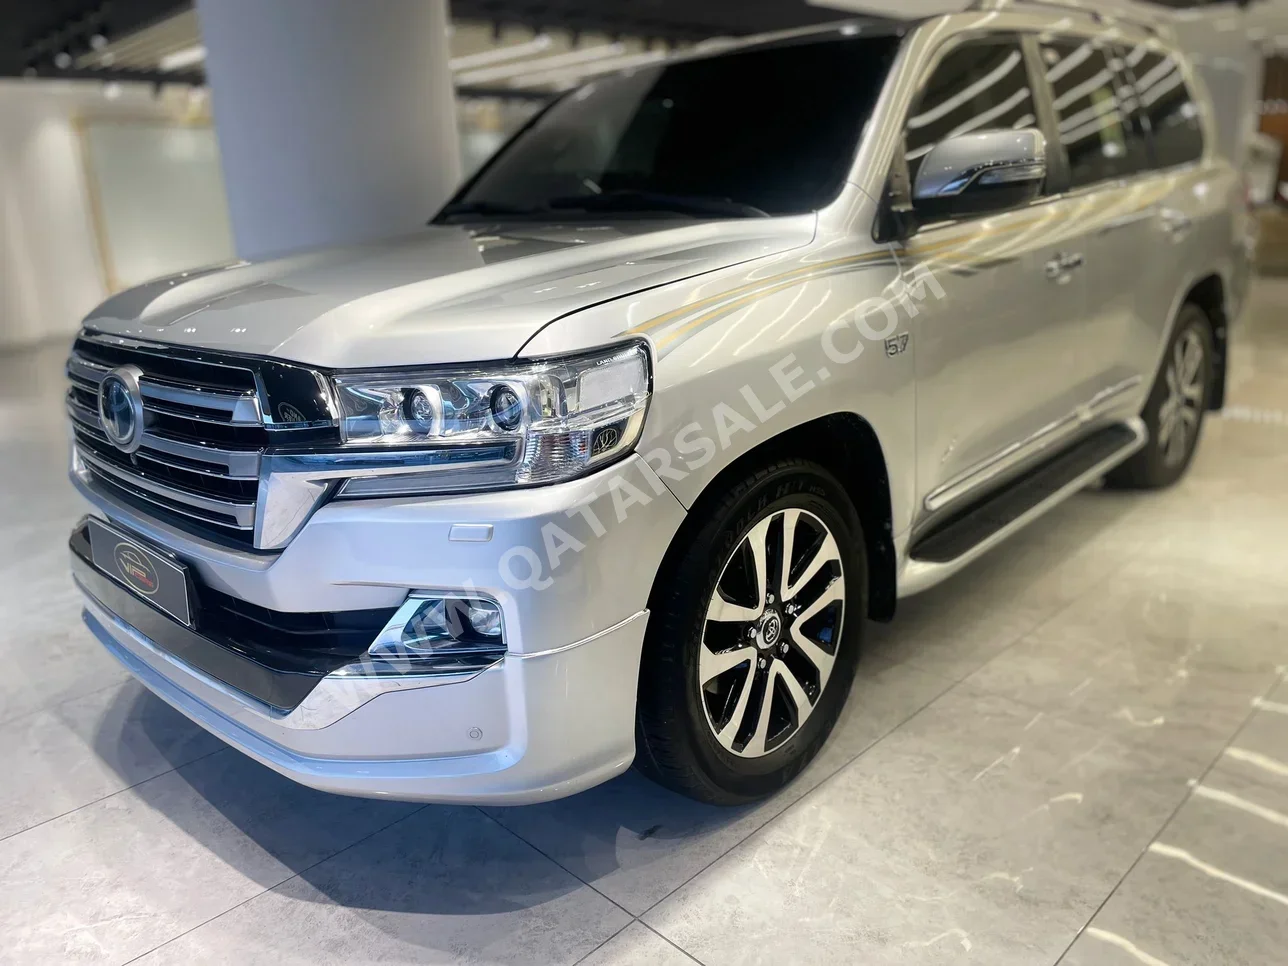 Toyota  Land Cruiser  VXS  2017  Automatic  200,000 Km  8 Cylinder  Four Wheel Drive (4WD)  SUV  Silver